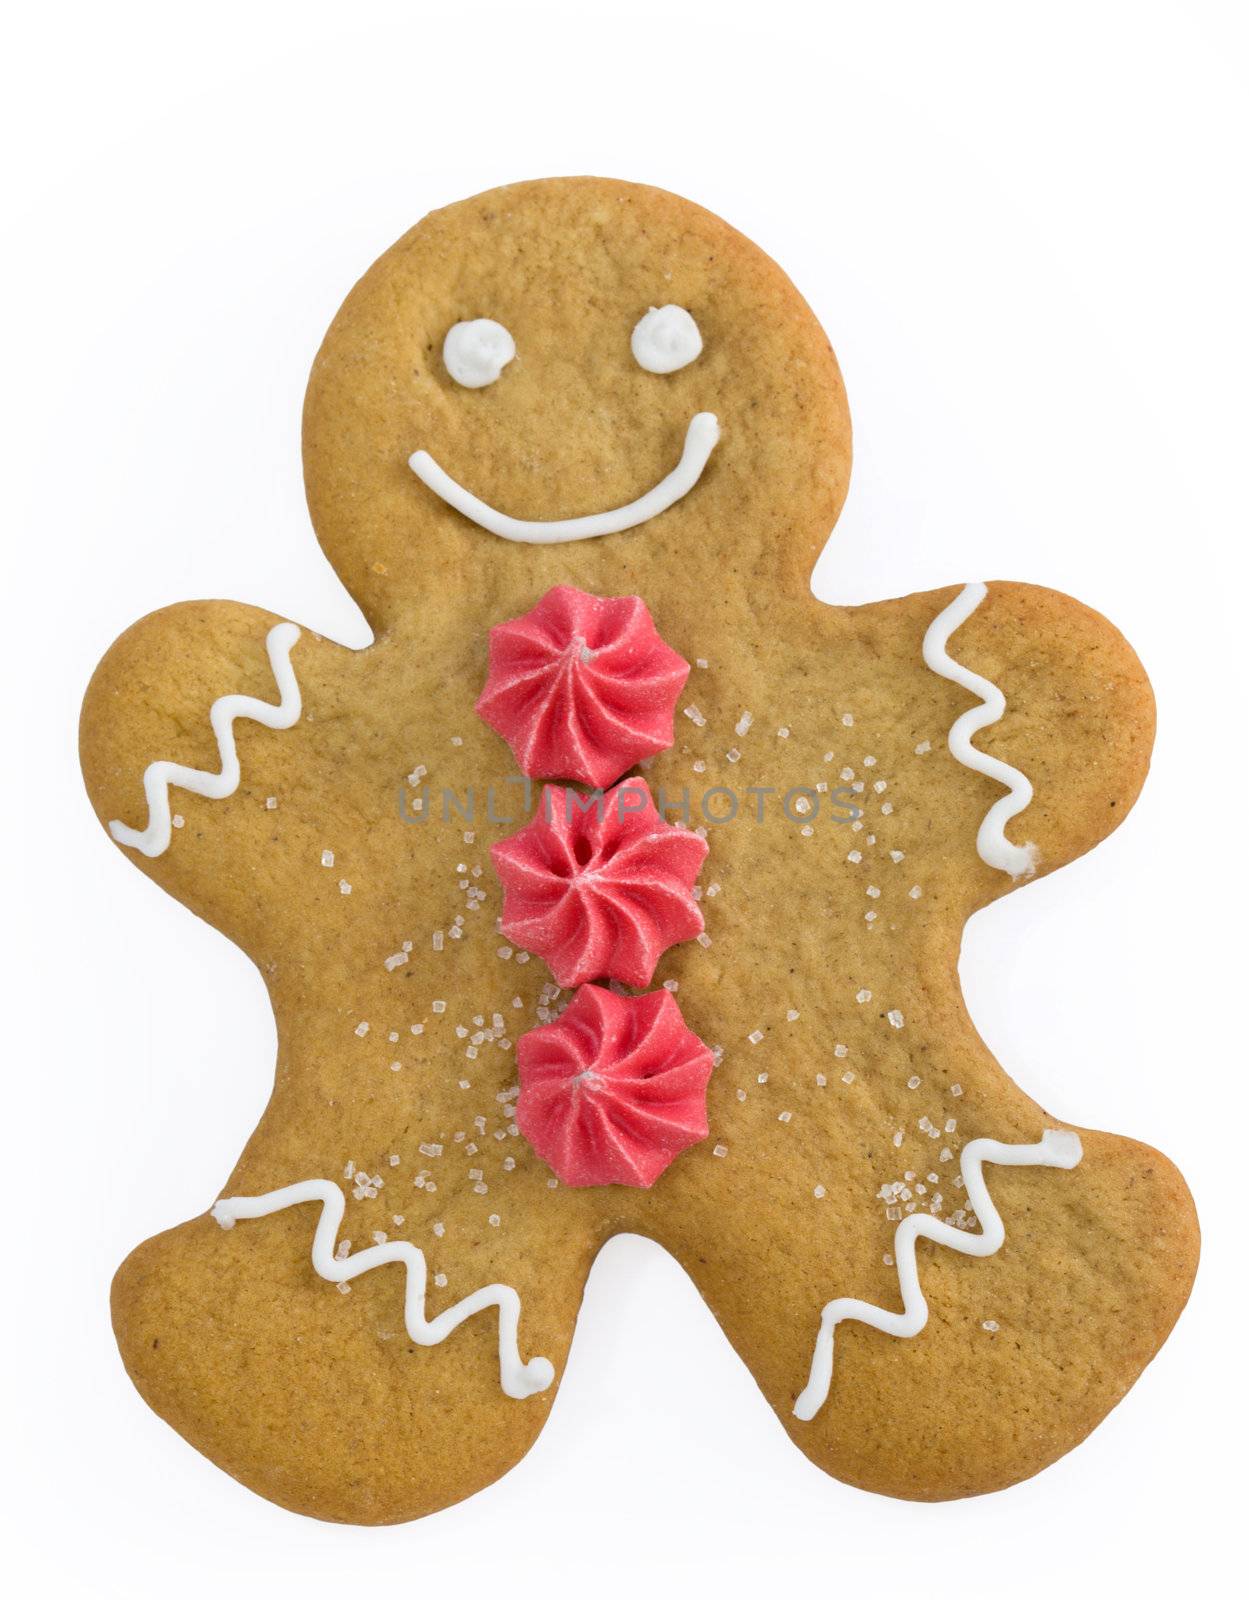 Smiling gingerbread man with sugar flower buttons